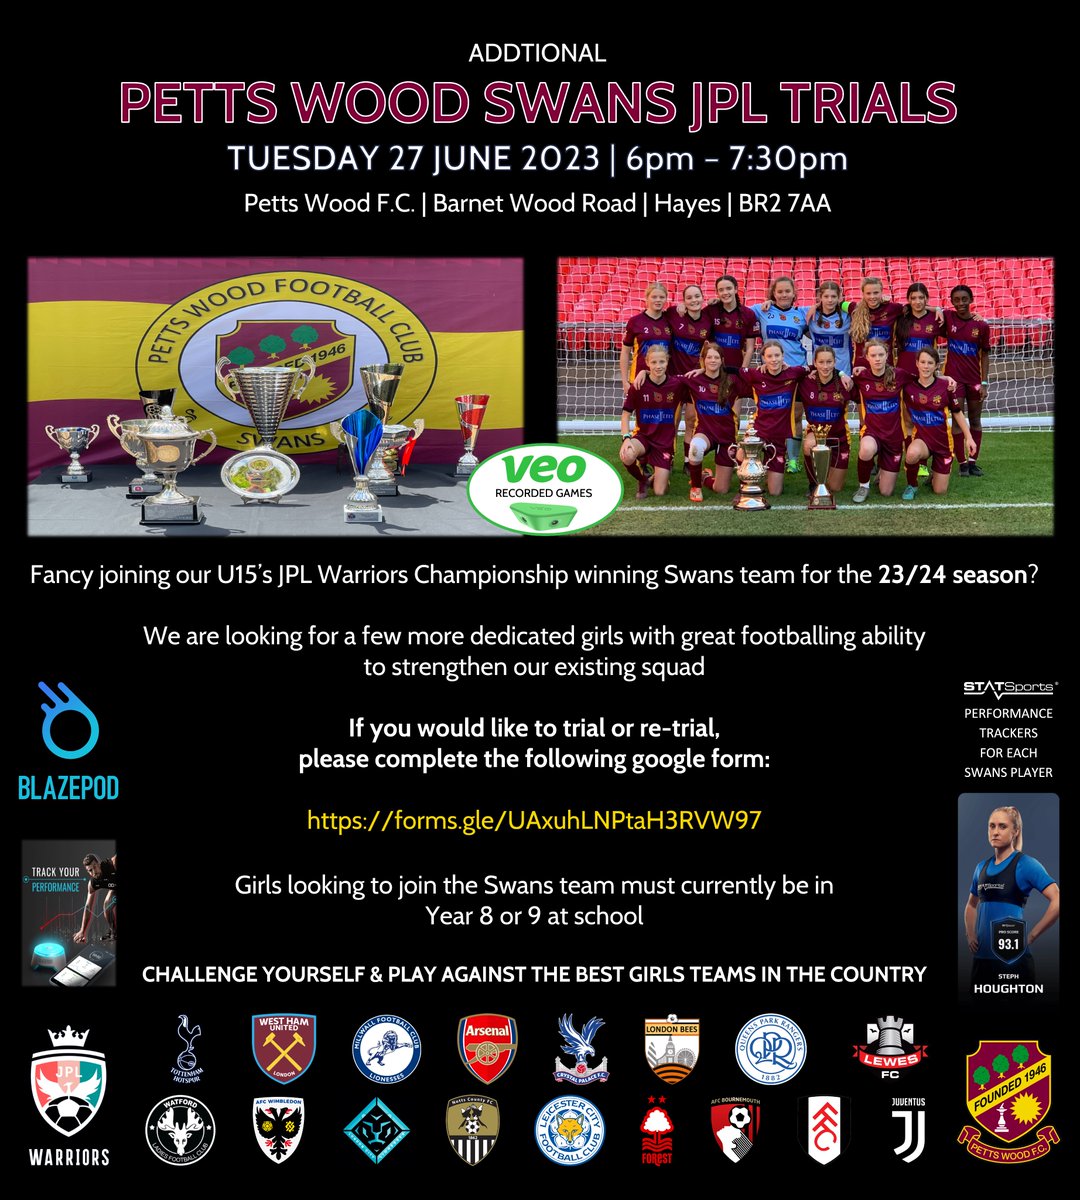 ADDTIONAL
⚽️ @PettsWoodSwans JPL TRIALS ⚽️
⏰ TUESDAY 27 JUNE 2023 | 6pm – 7:30pm
🏟️ Petts Wood F.C. | Barnet Wood Road | Hayes | BR2 7AA

If you would like to trial or re-trial, please complete the following google form:

forms.gle/UAxuhLNPtaH3RV…

#JPLWarriors | @PettsWood_FC